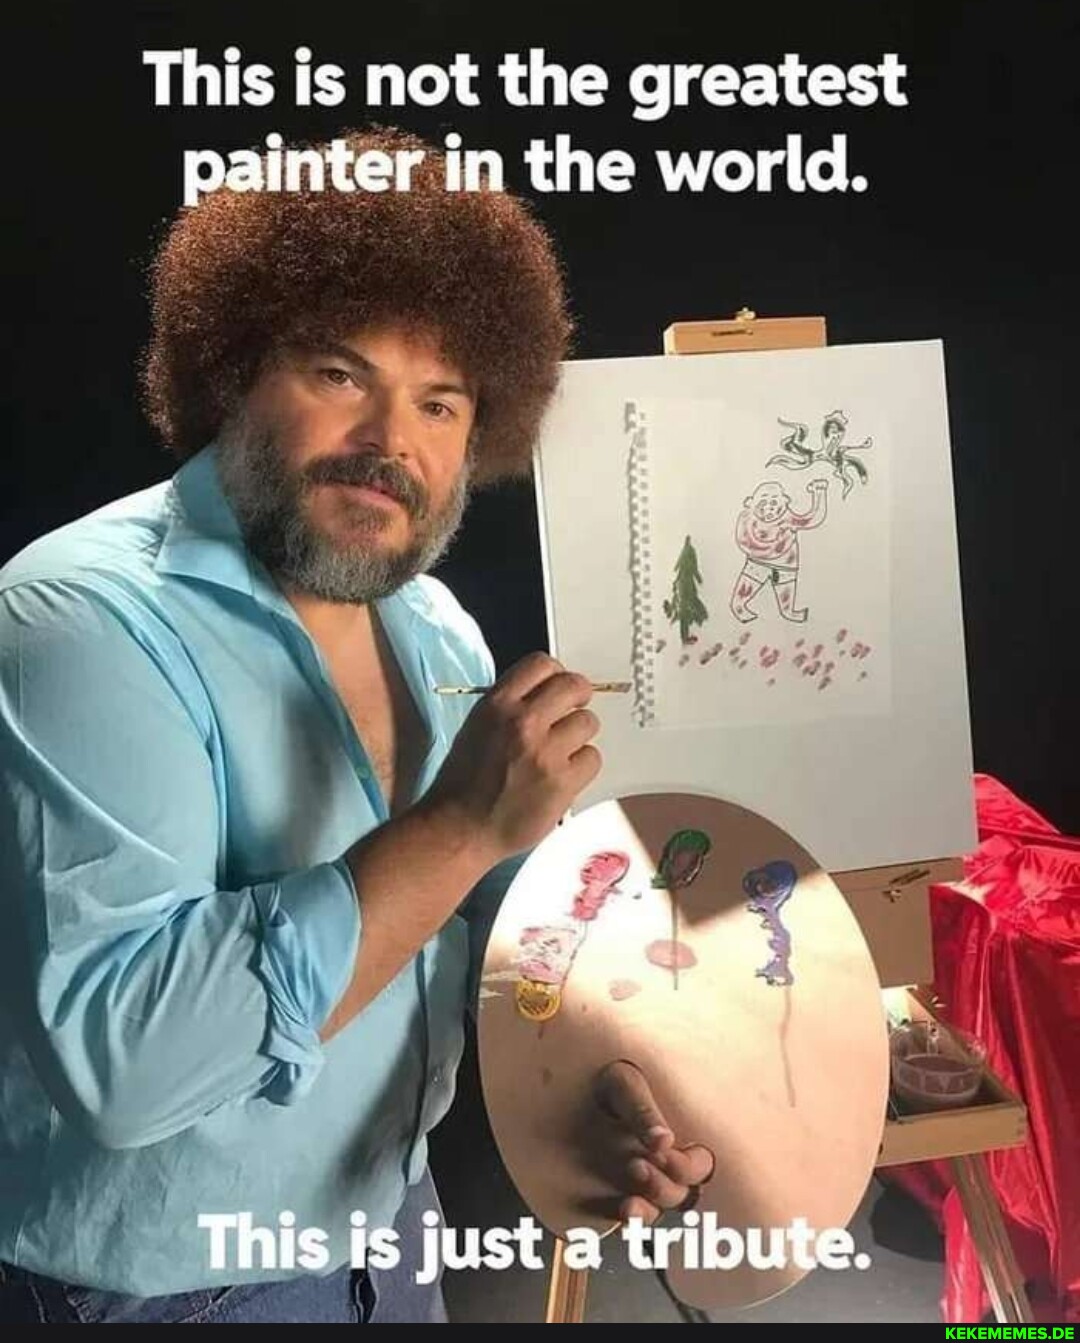 This is not the greatest painter in the world. This is just a tribute.